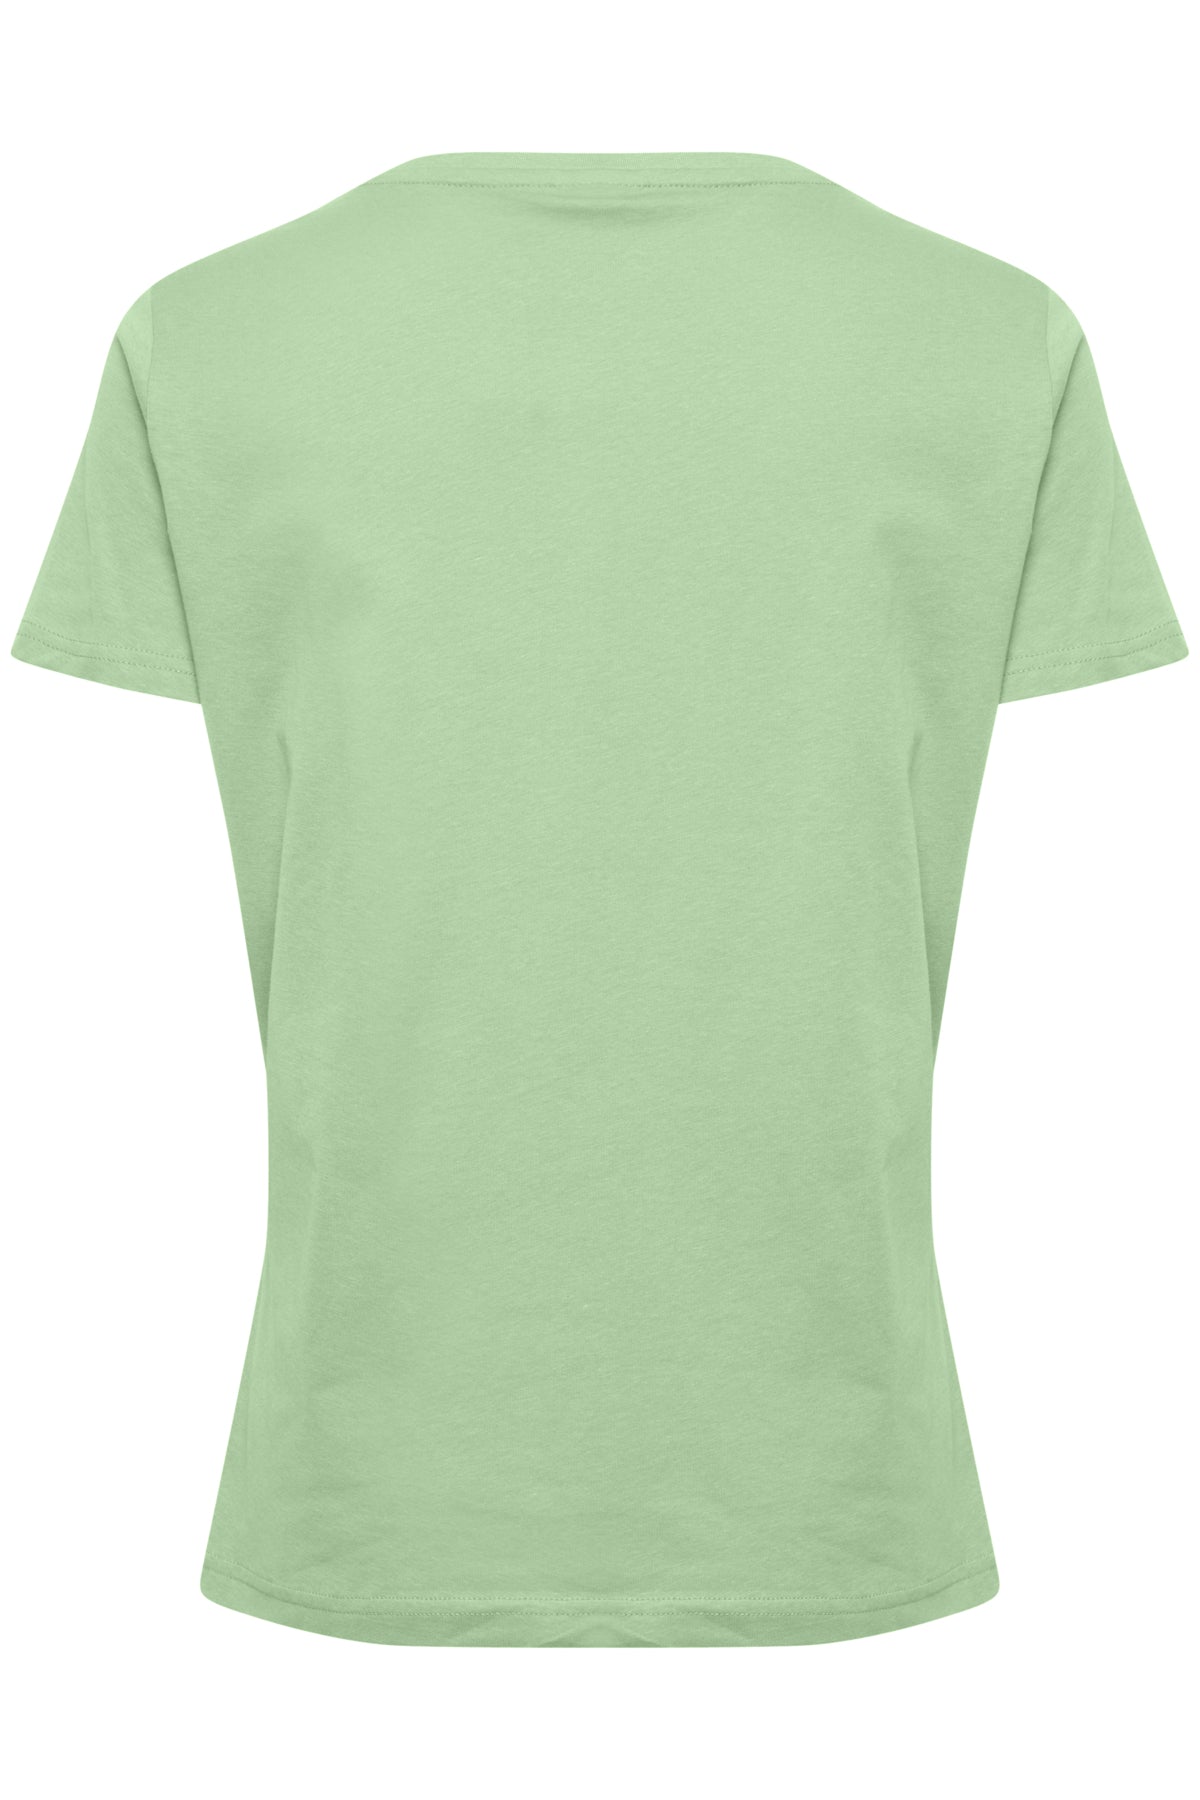 Fransa FRRILEY TEE 1, Forest Shade Mix